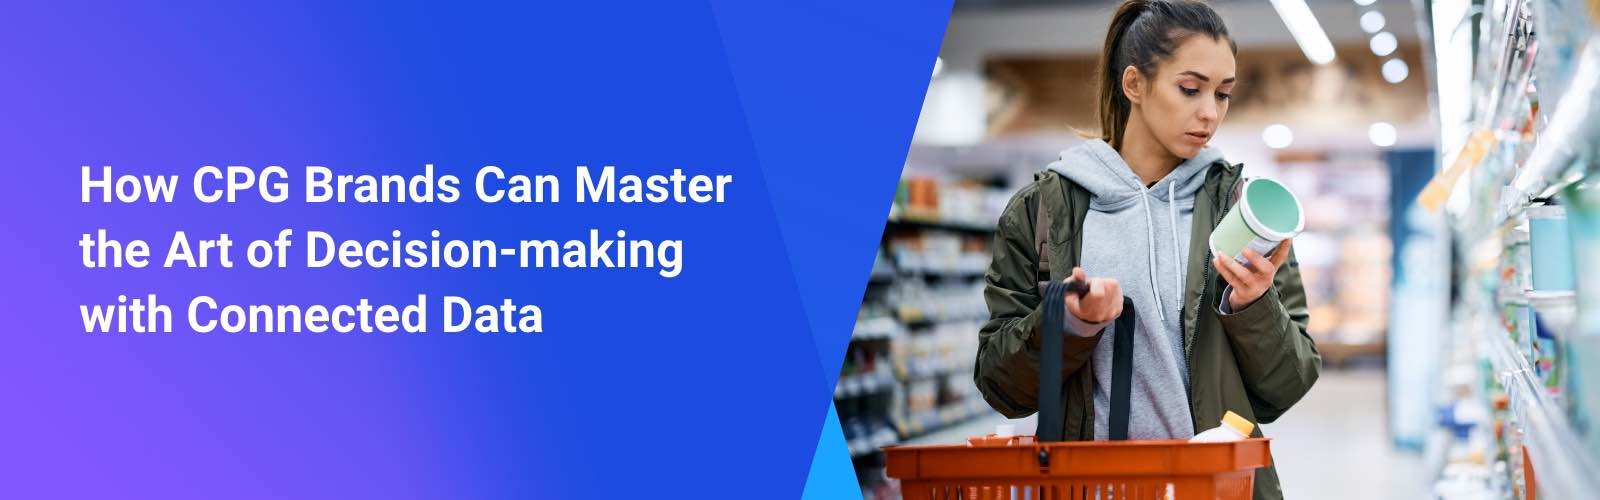 How CPG Brands Can Master the Art of Decision-making With Connected Data